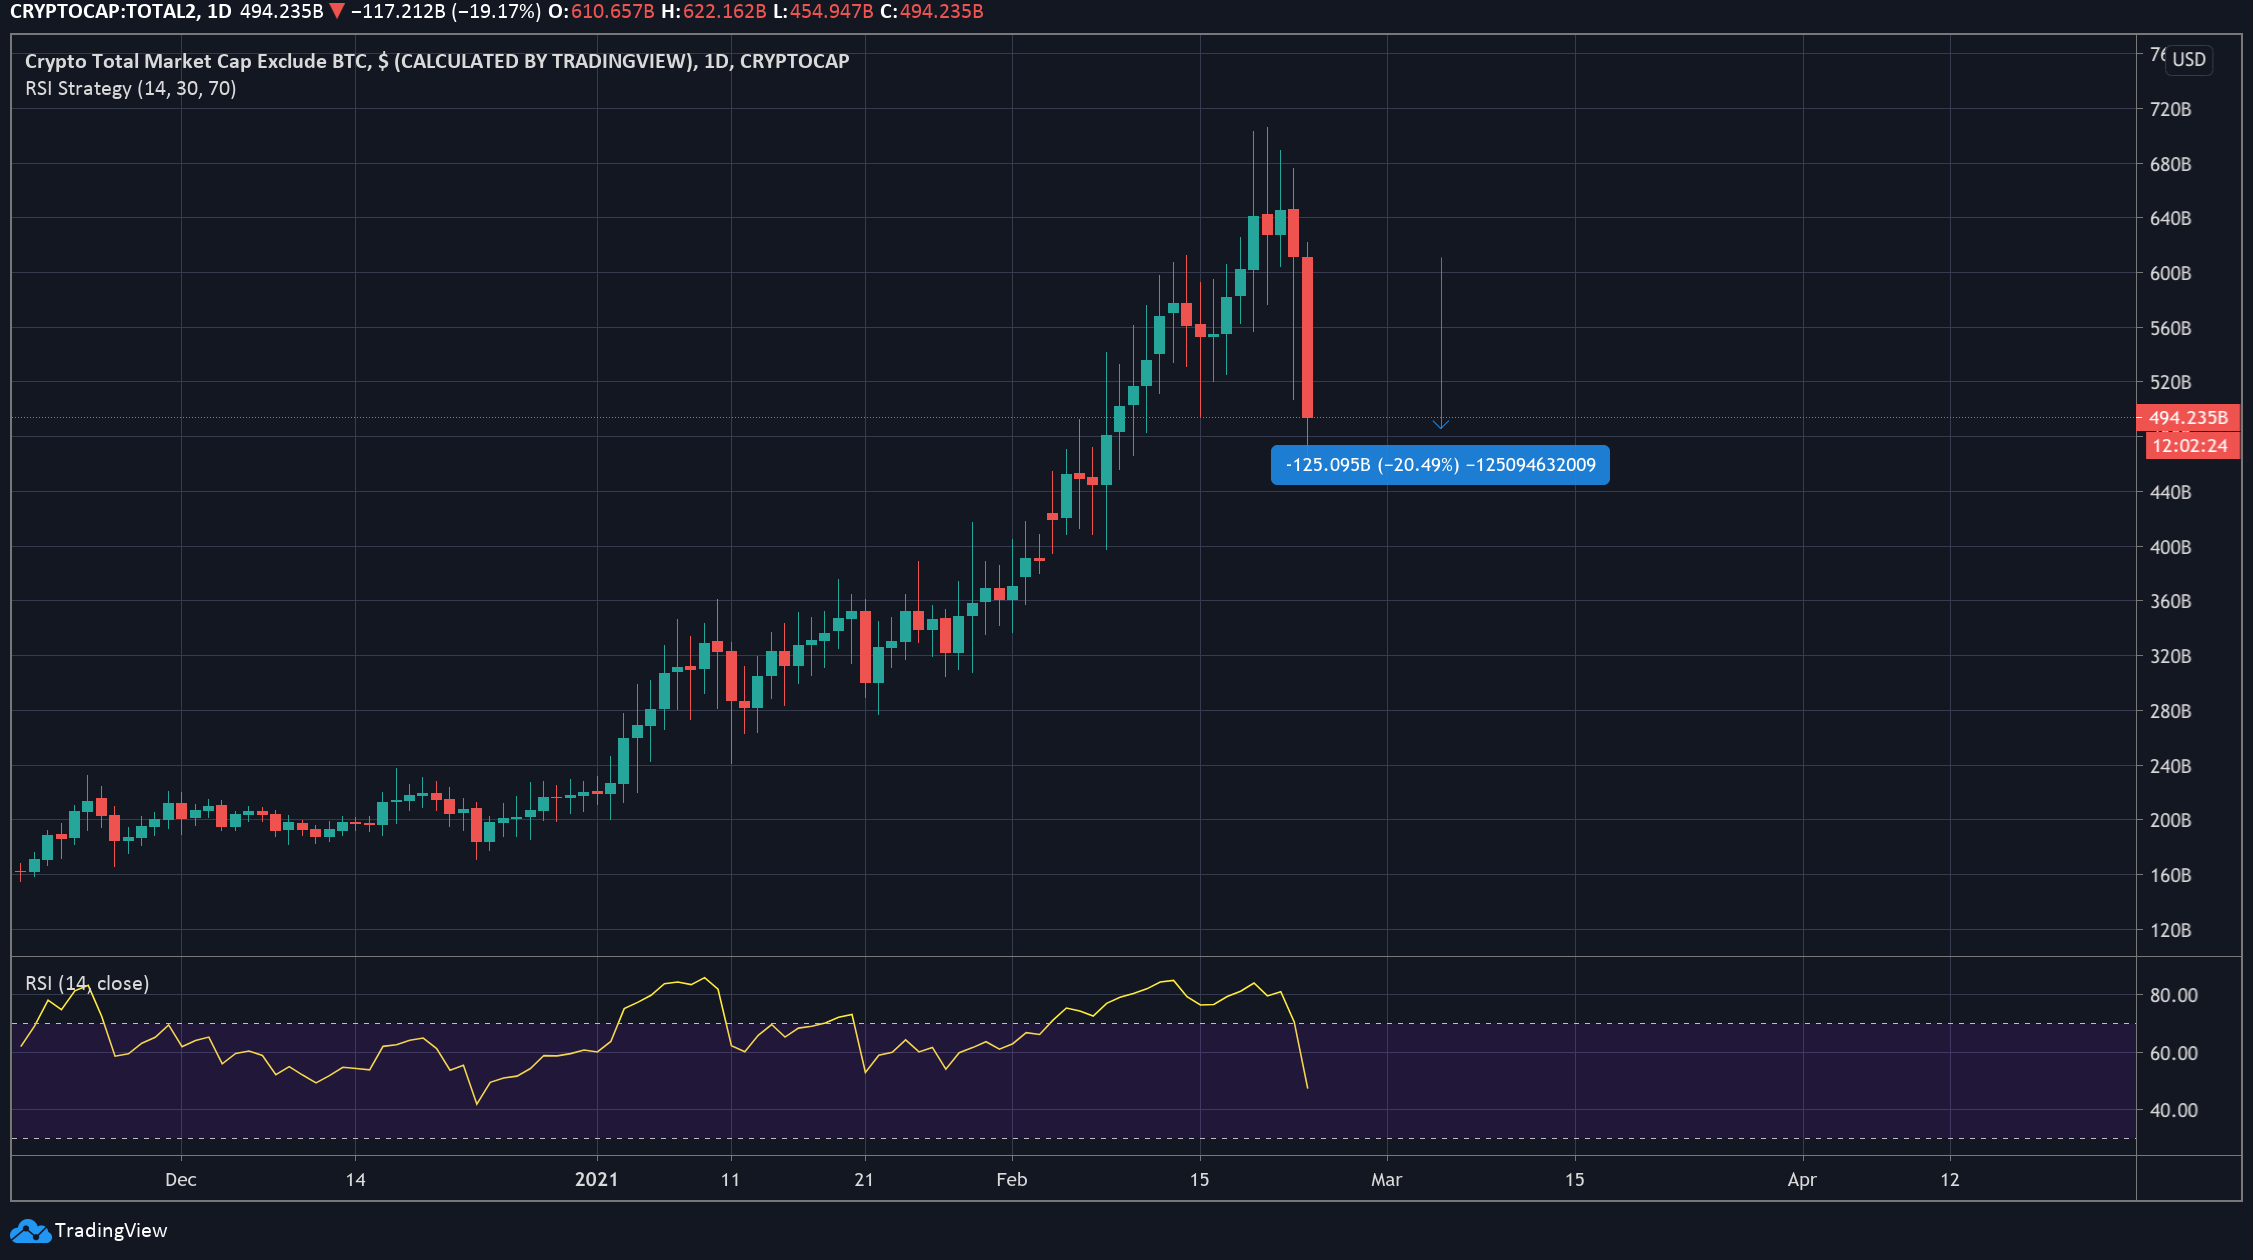 Total Crypto Market Cap in USD excluding BTC, 1-Day chart showing a highly correlated price/action